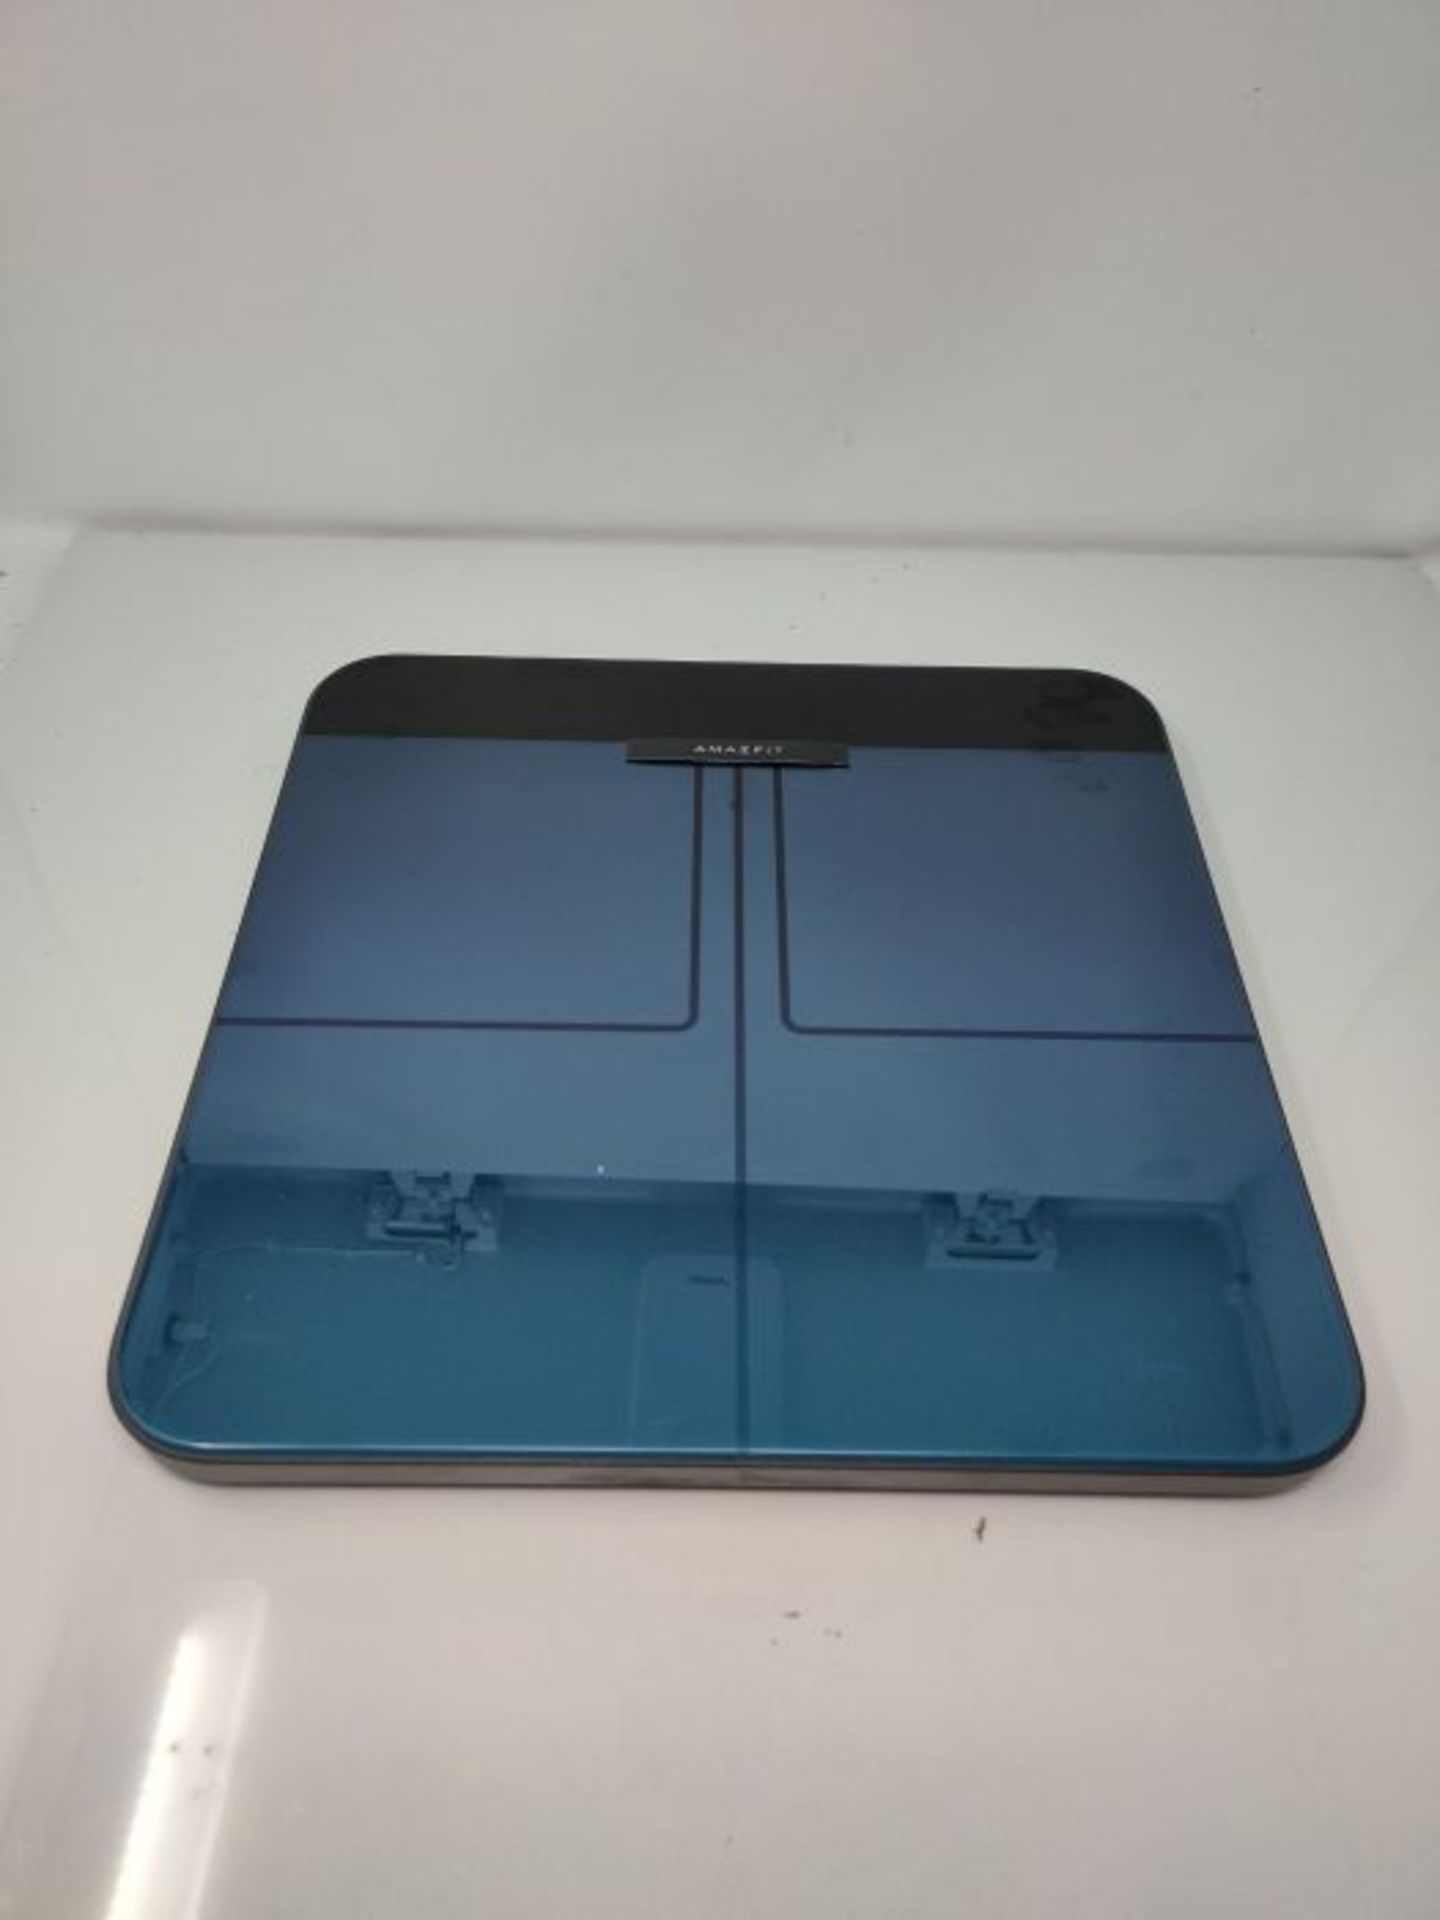 Amazfit Body Composition Smart Scale, Digital Bathroom Scale, Body Weight Monitor, Bod - Image 3 of 3